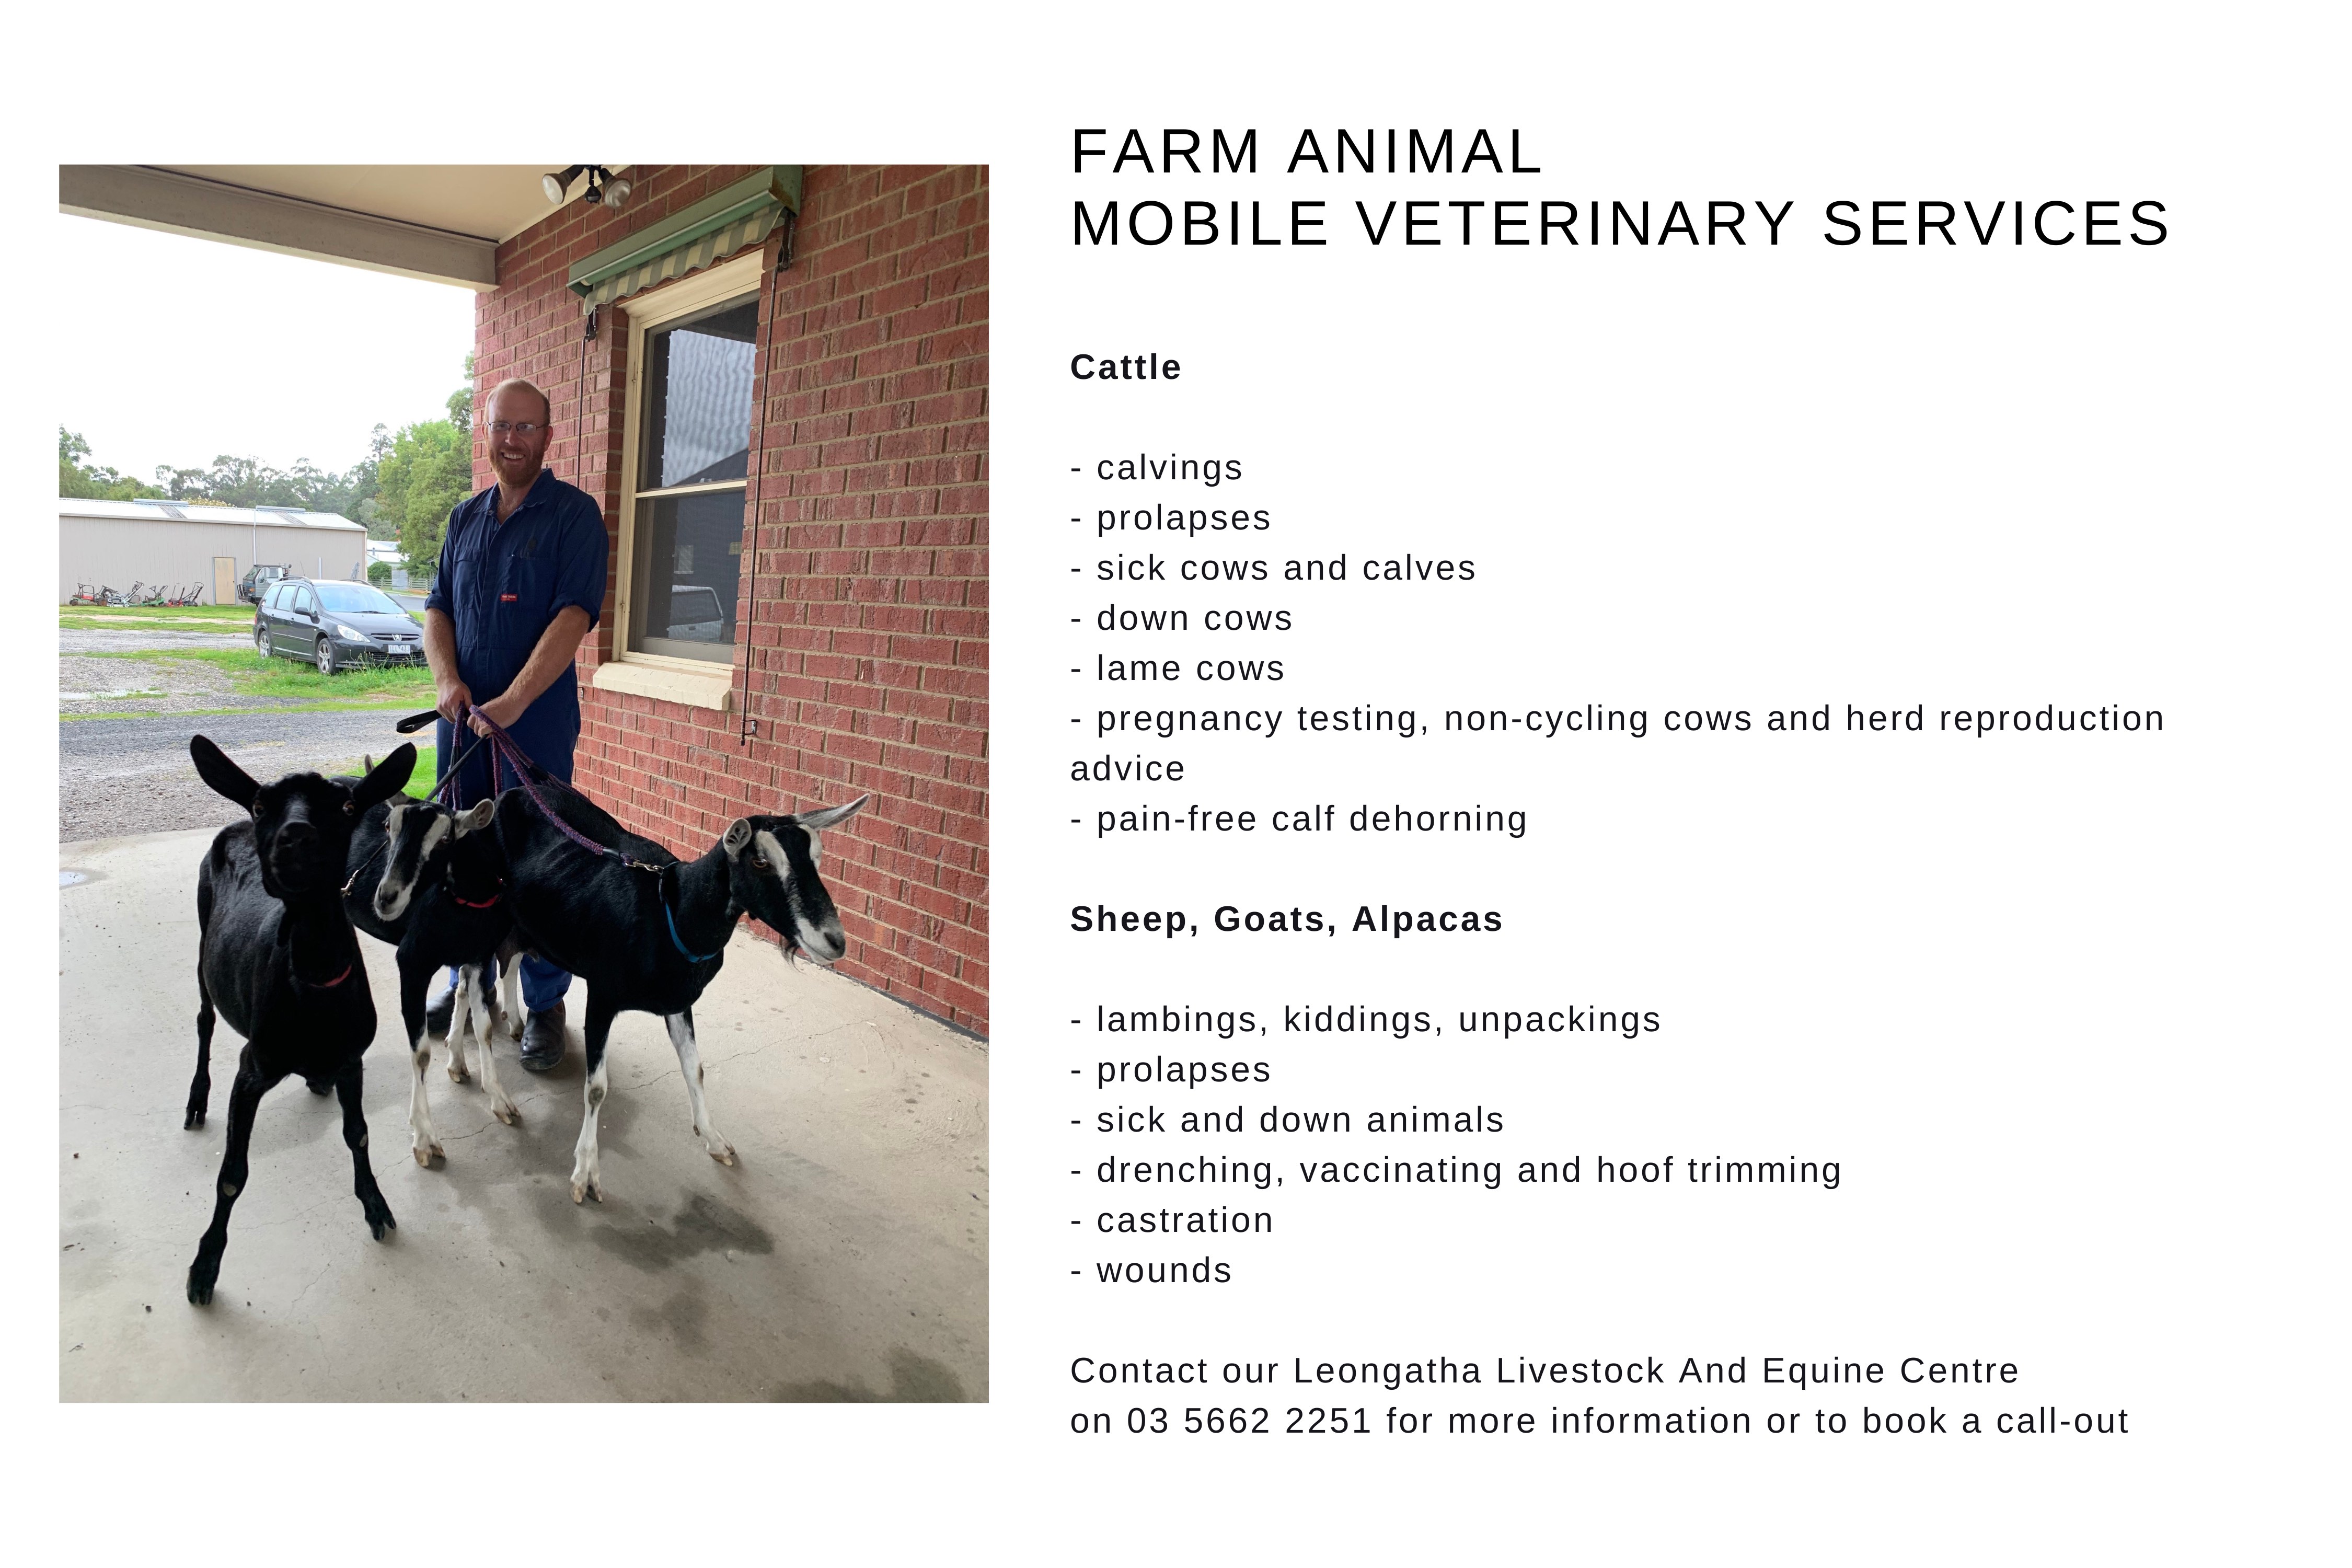 Mobile Veterinary Services 1 